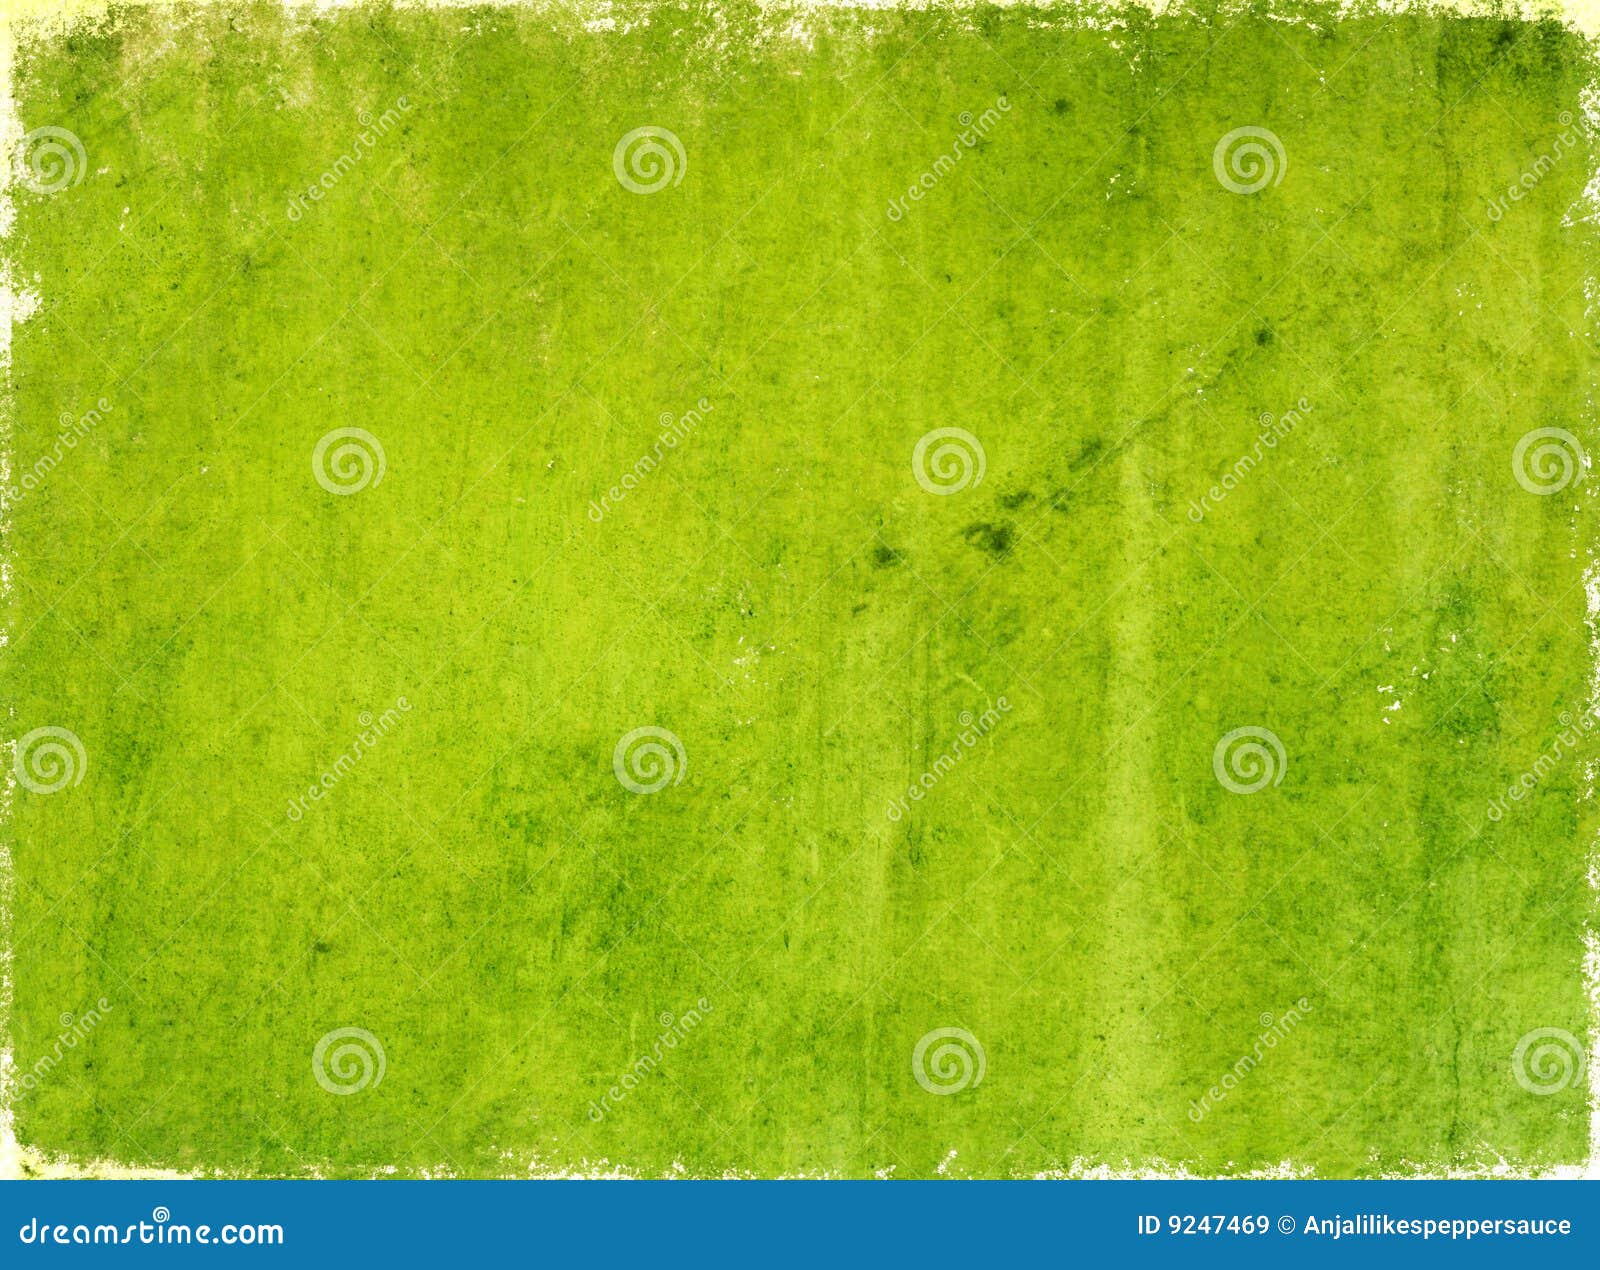 earthy background texture